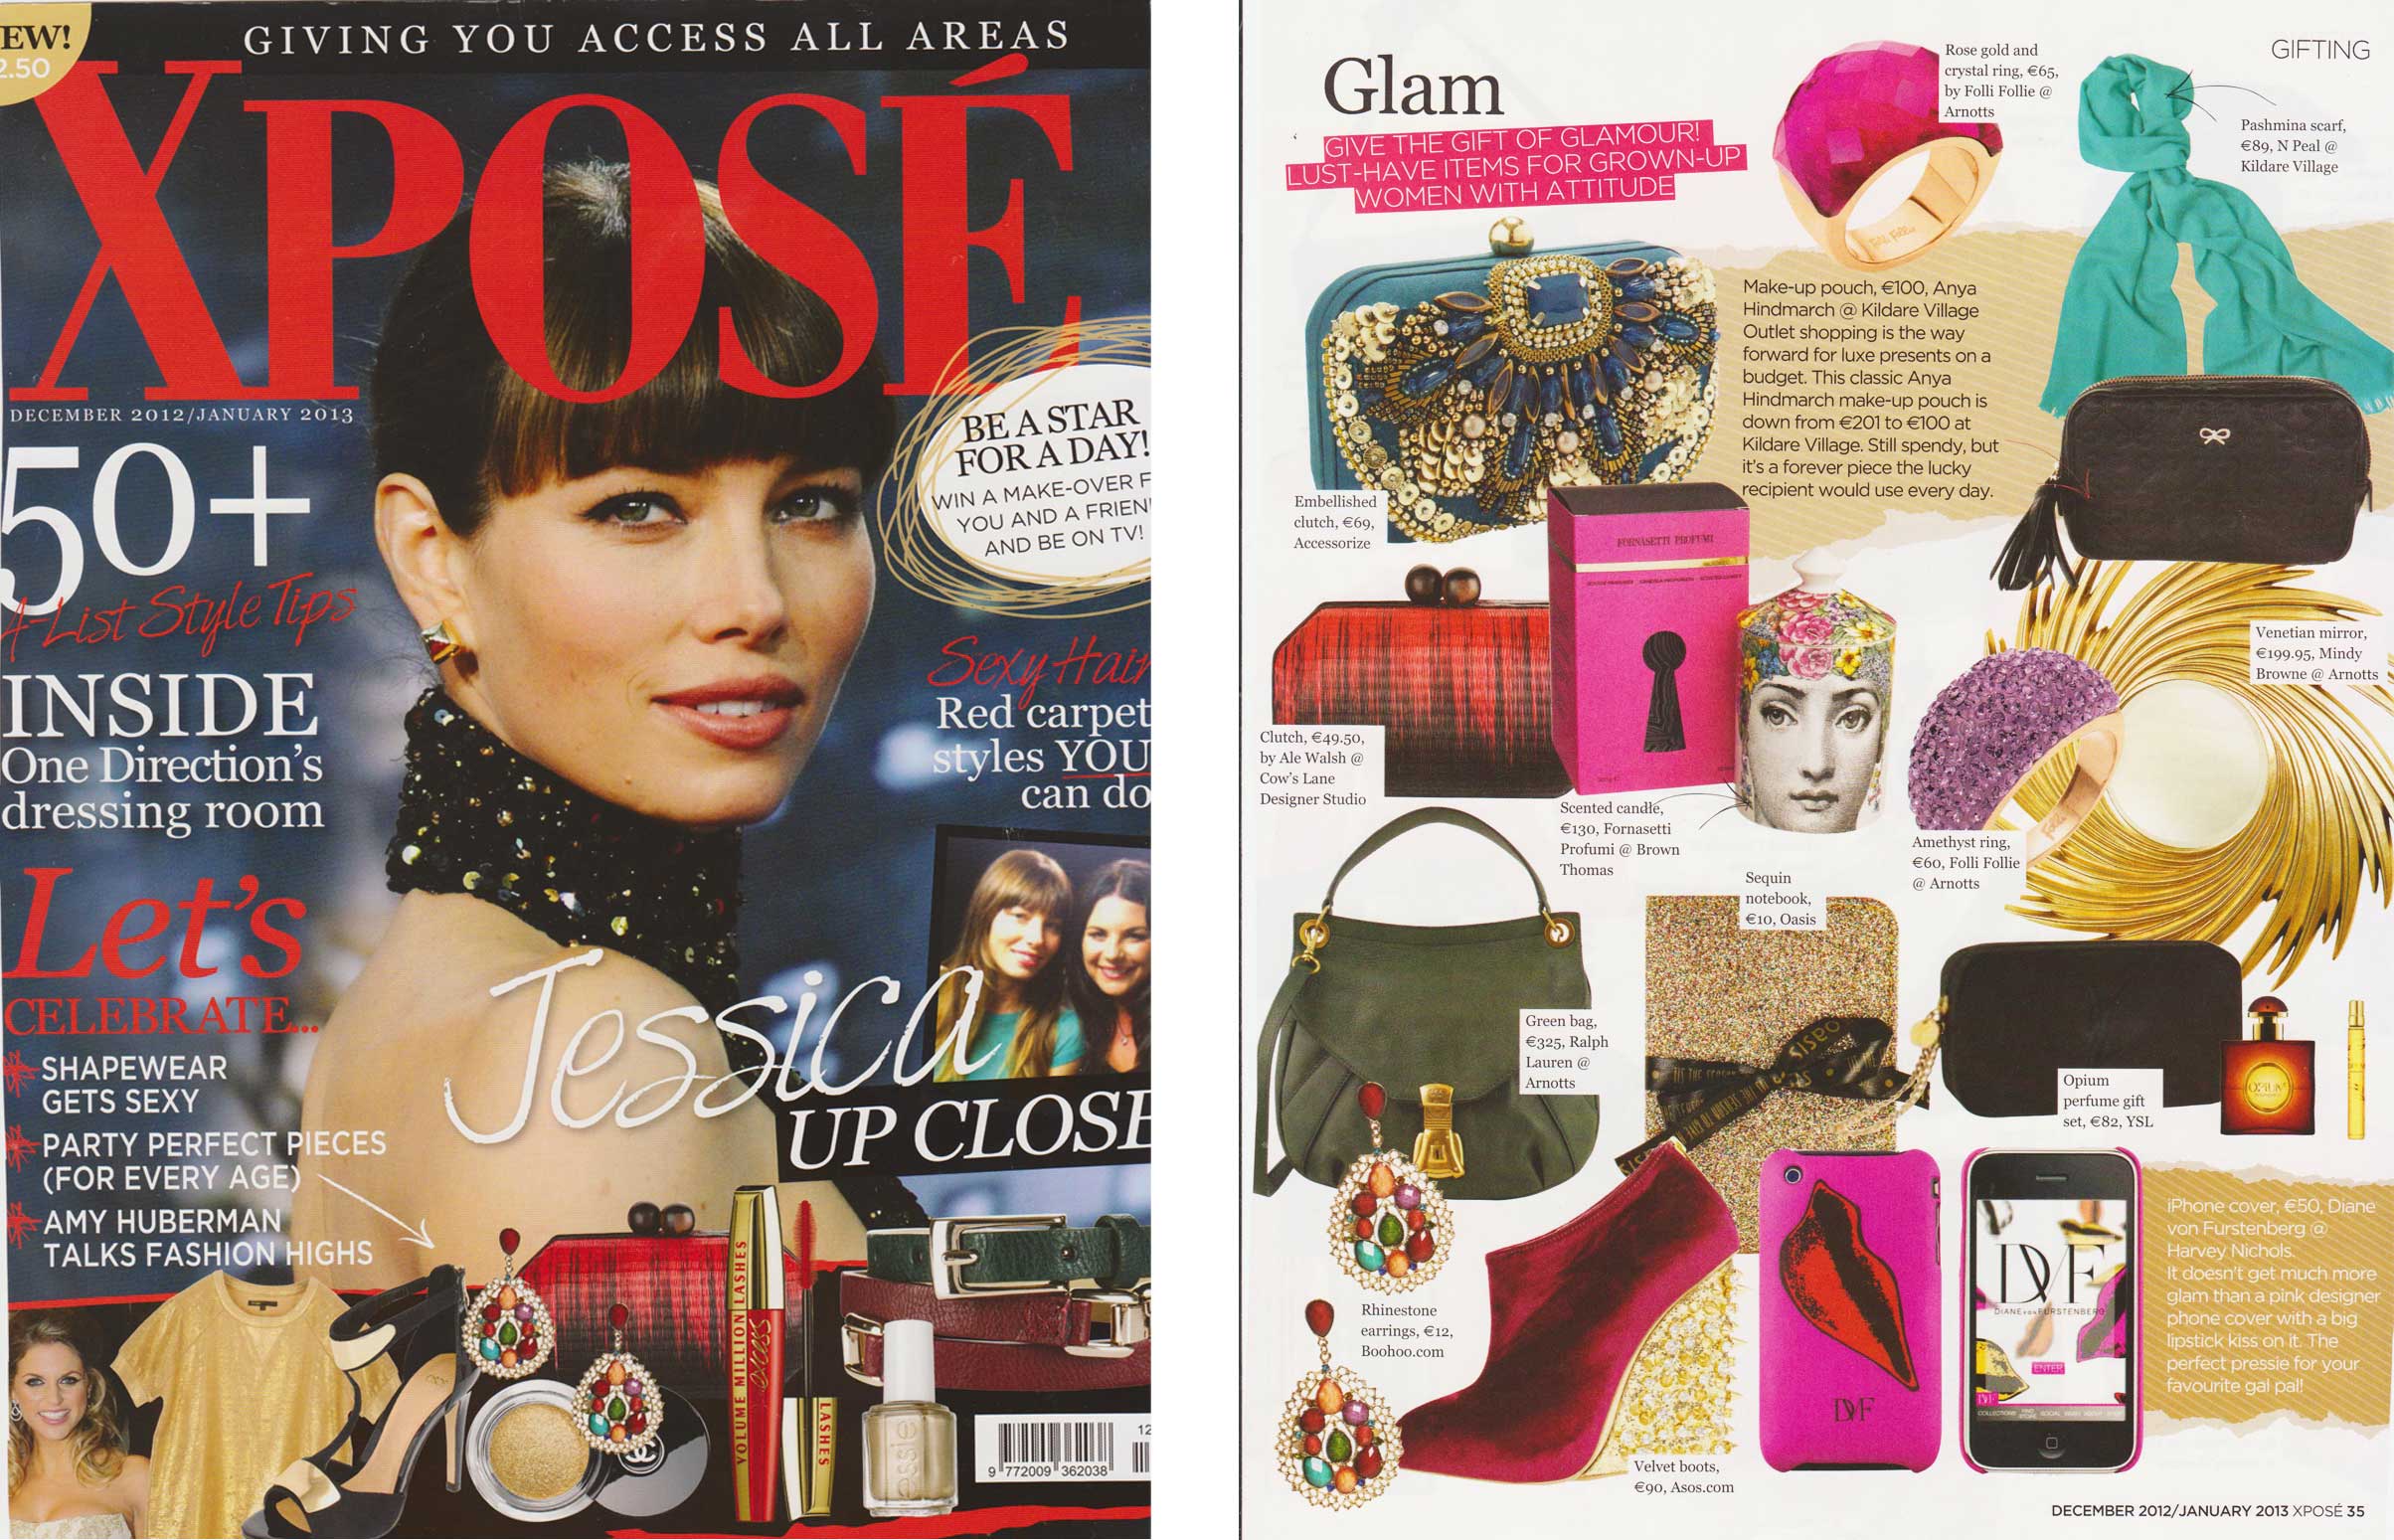 Xpose Magazine Cover and fashion article featuring Ale Walsh Designer Handbag